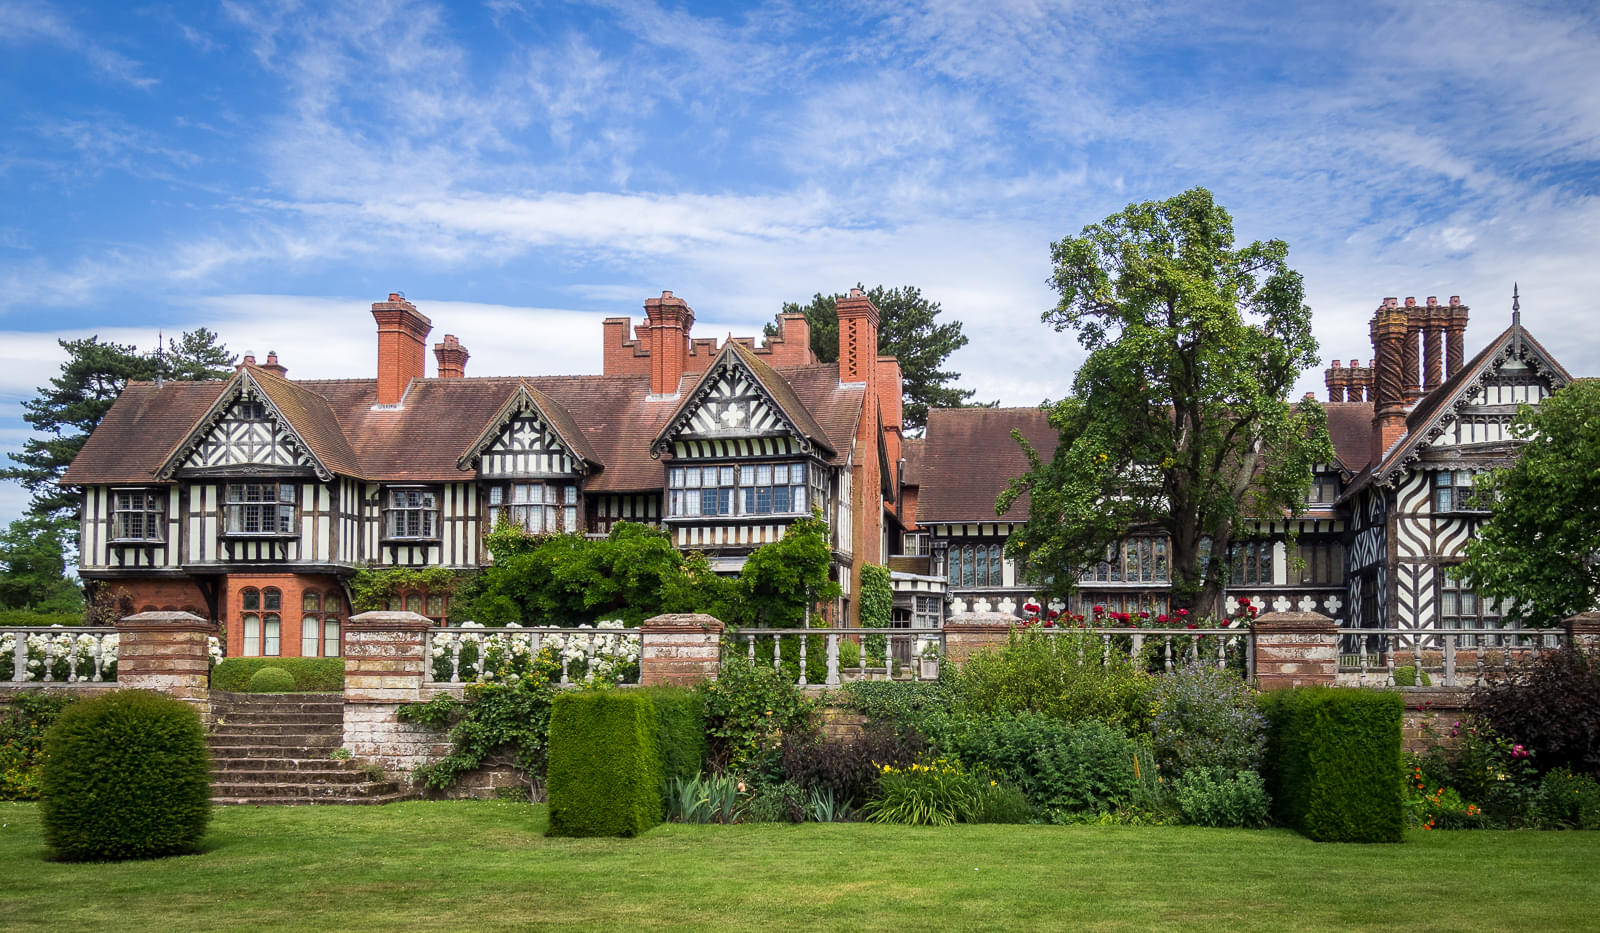 Wightwick Manor Overview